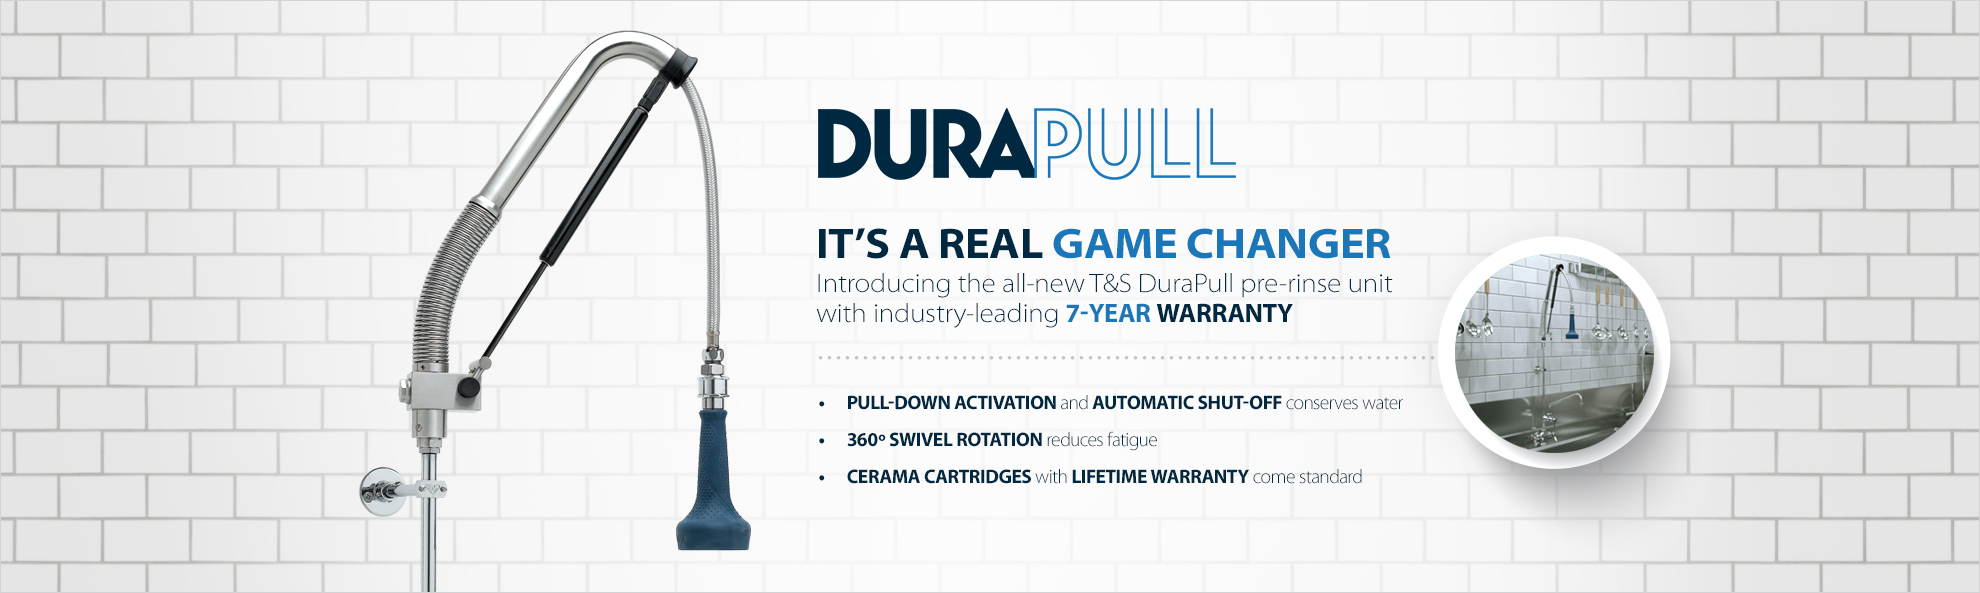 Introducing the all-new T&S DuraPull pre-rinse unit